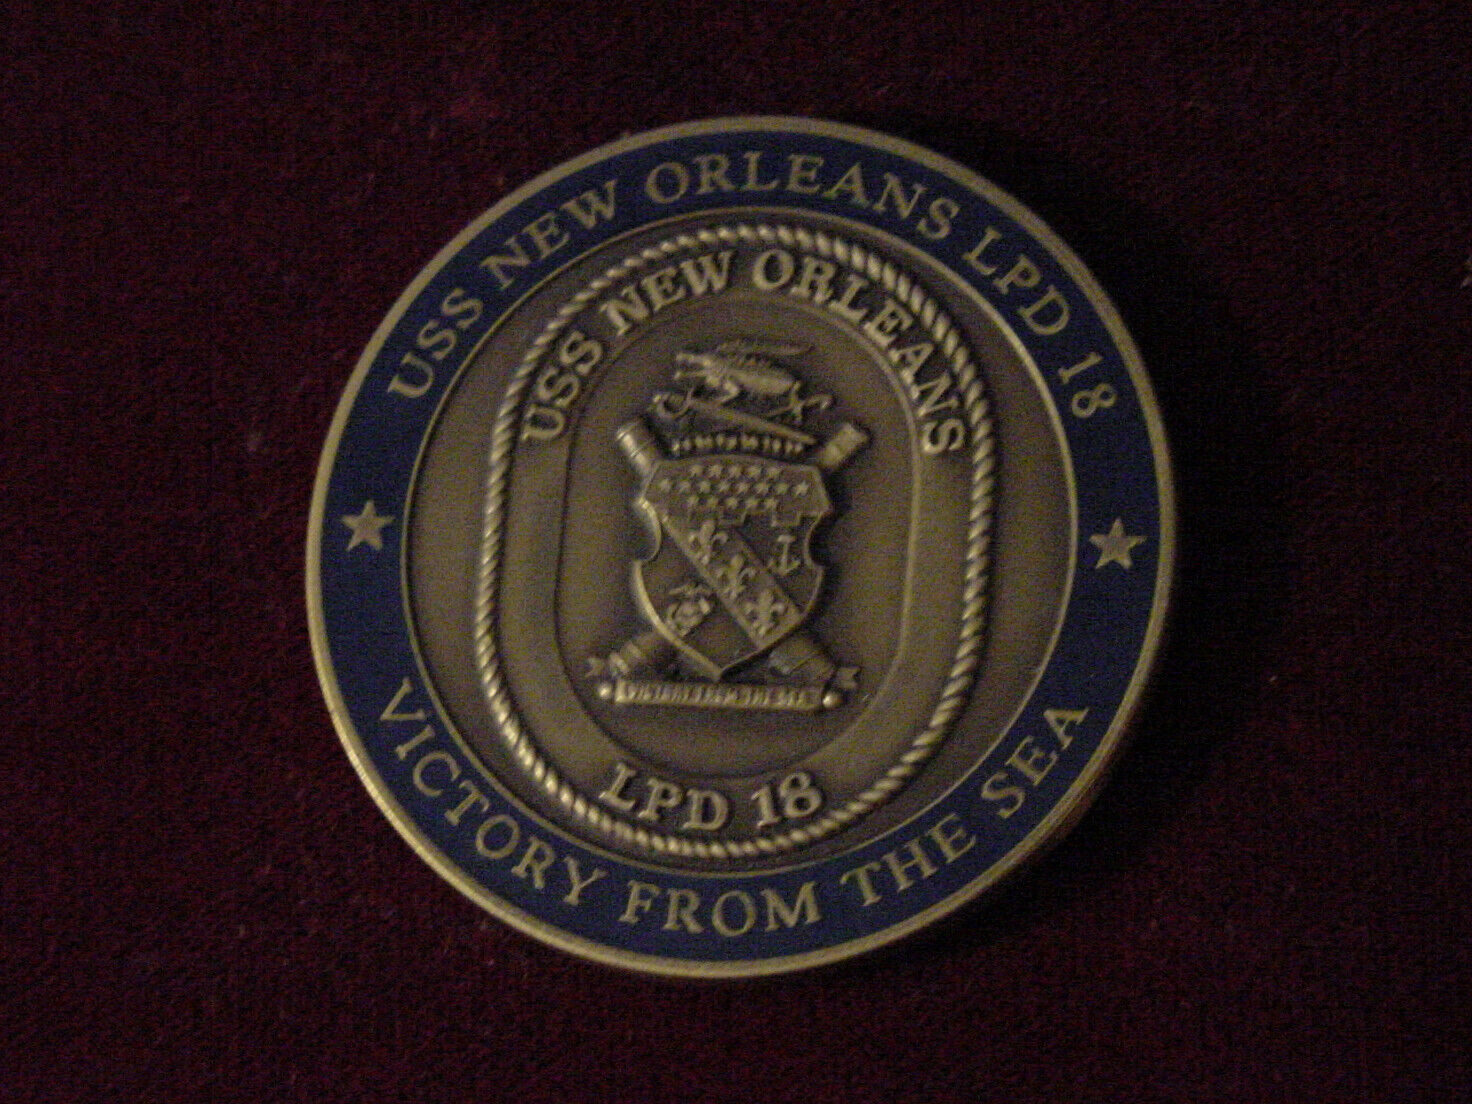 USS NEW ORLEANS LPD 18 VICTORY FROM THE SEA - Challenge coin